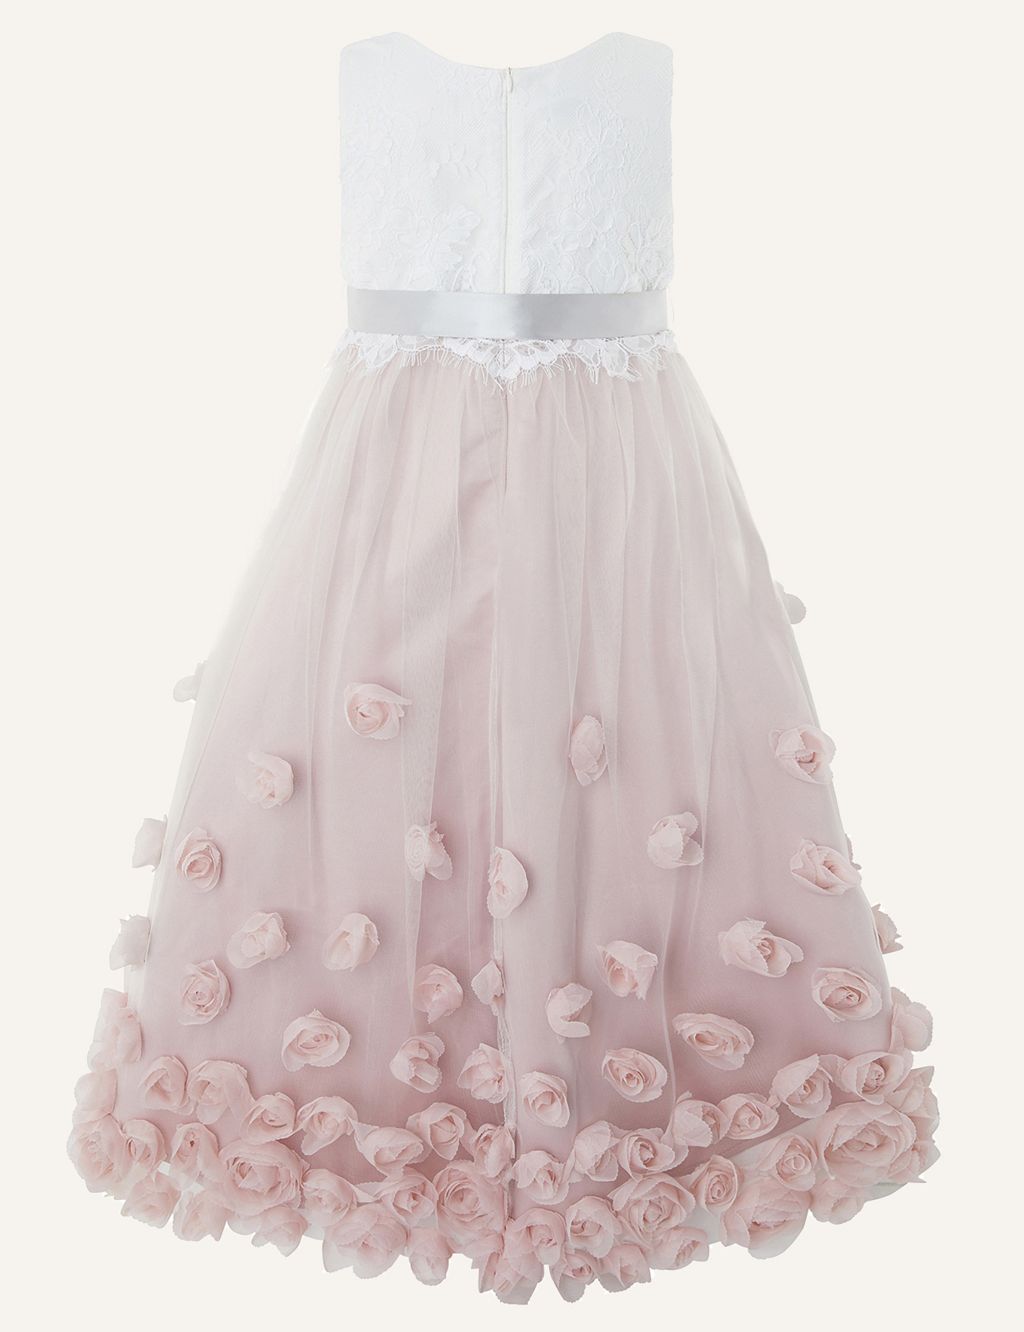 Floral Occasion Dress (3-15 Yrs) image 2